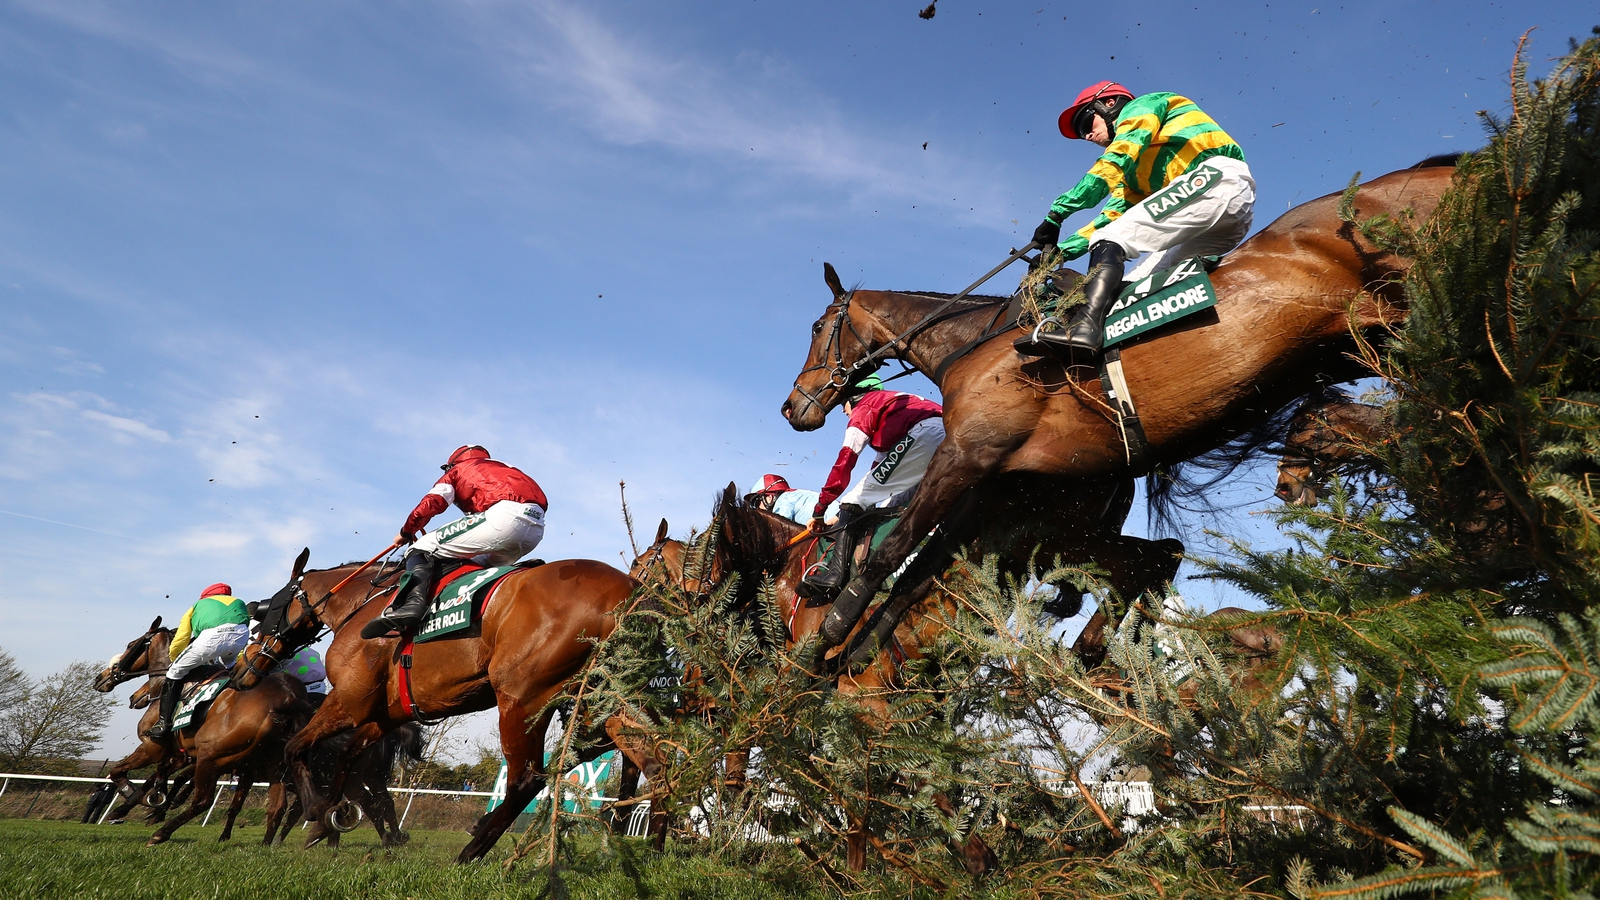 Grand national race conditions 2019